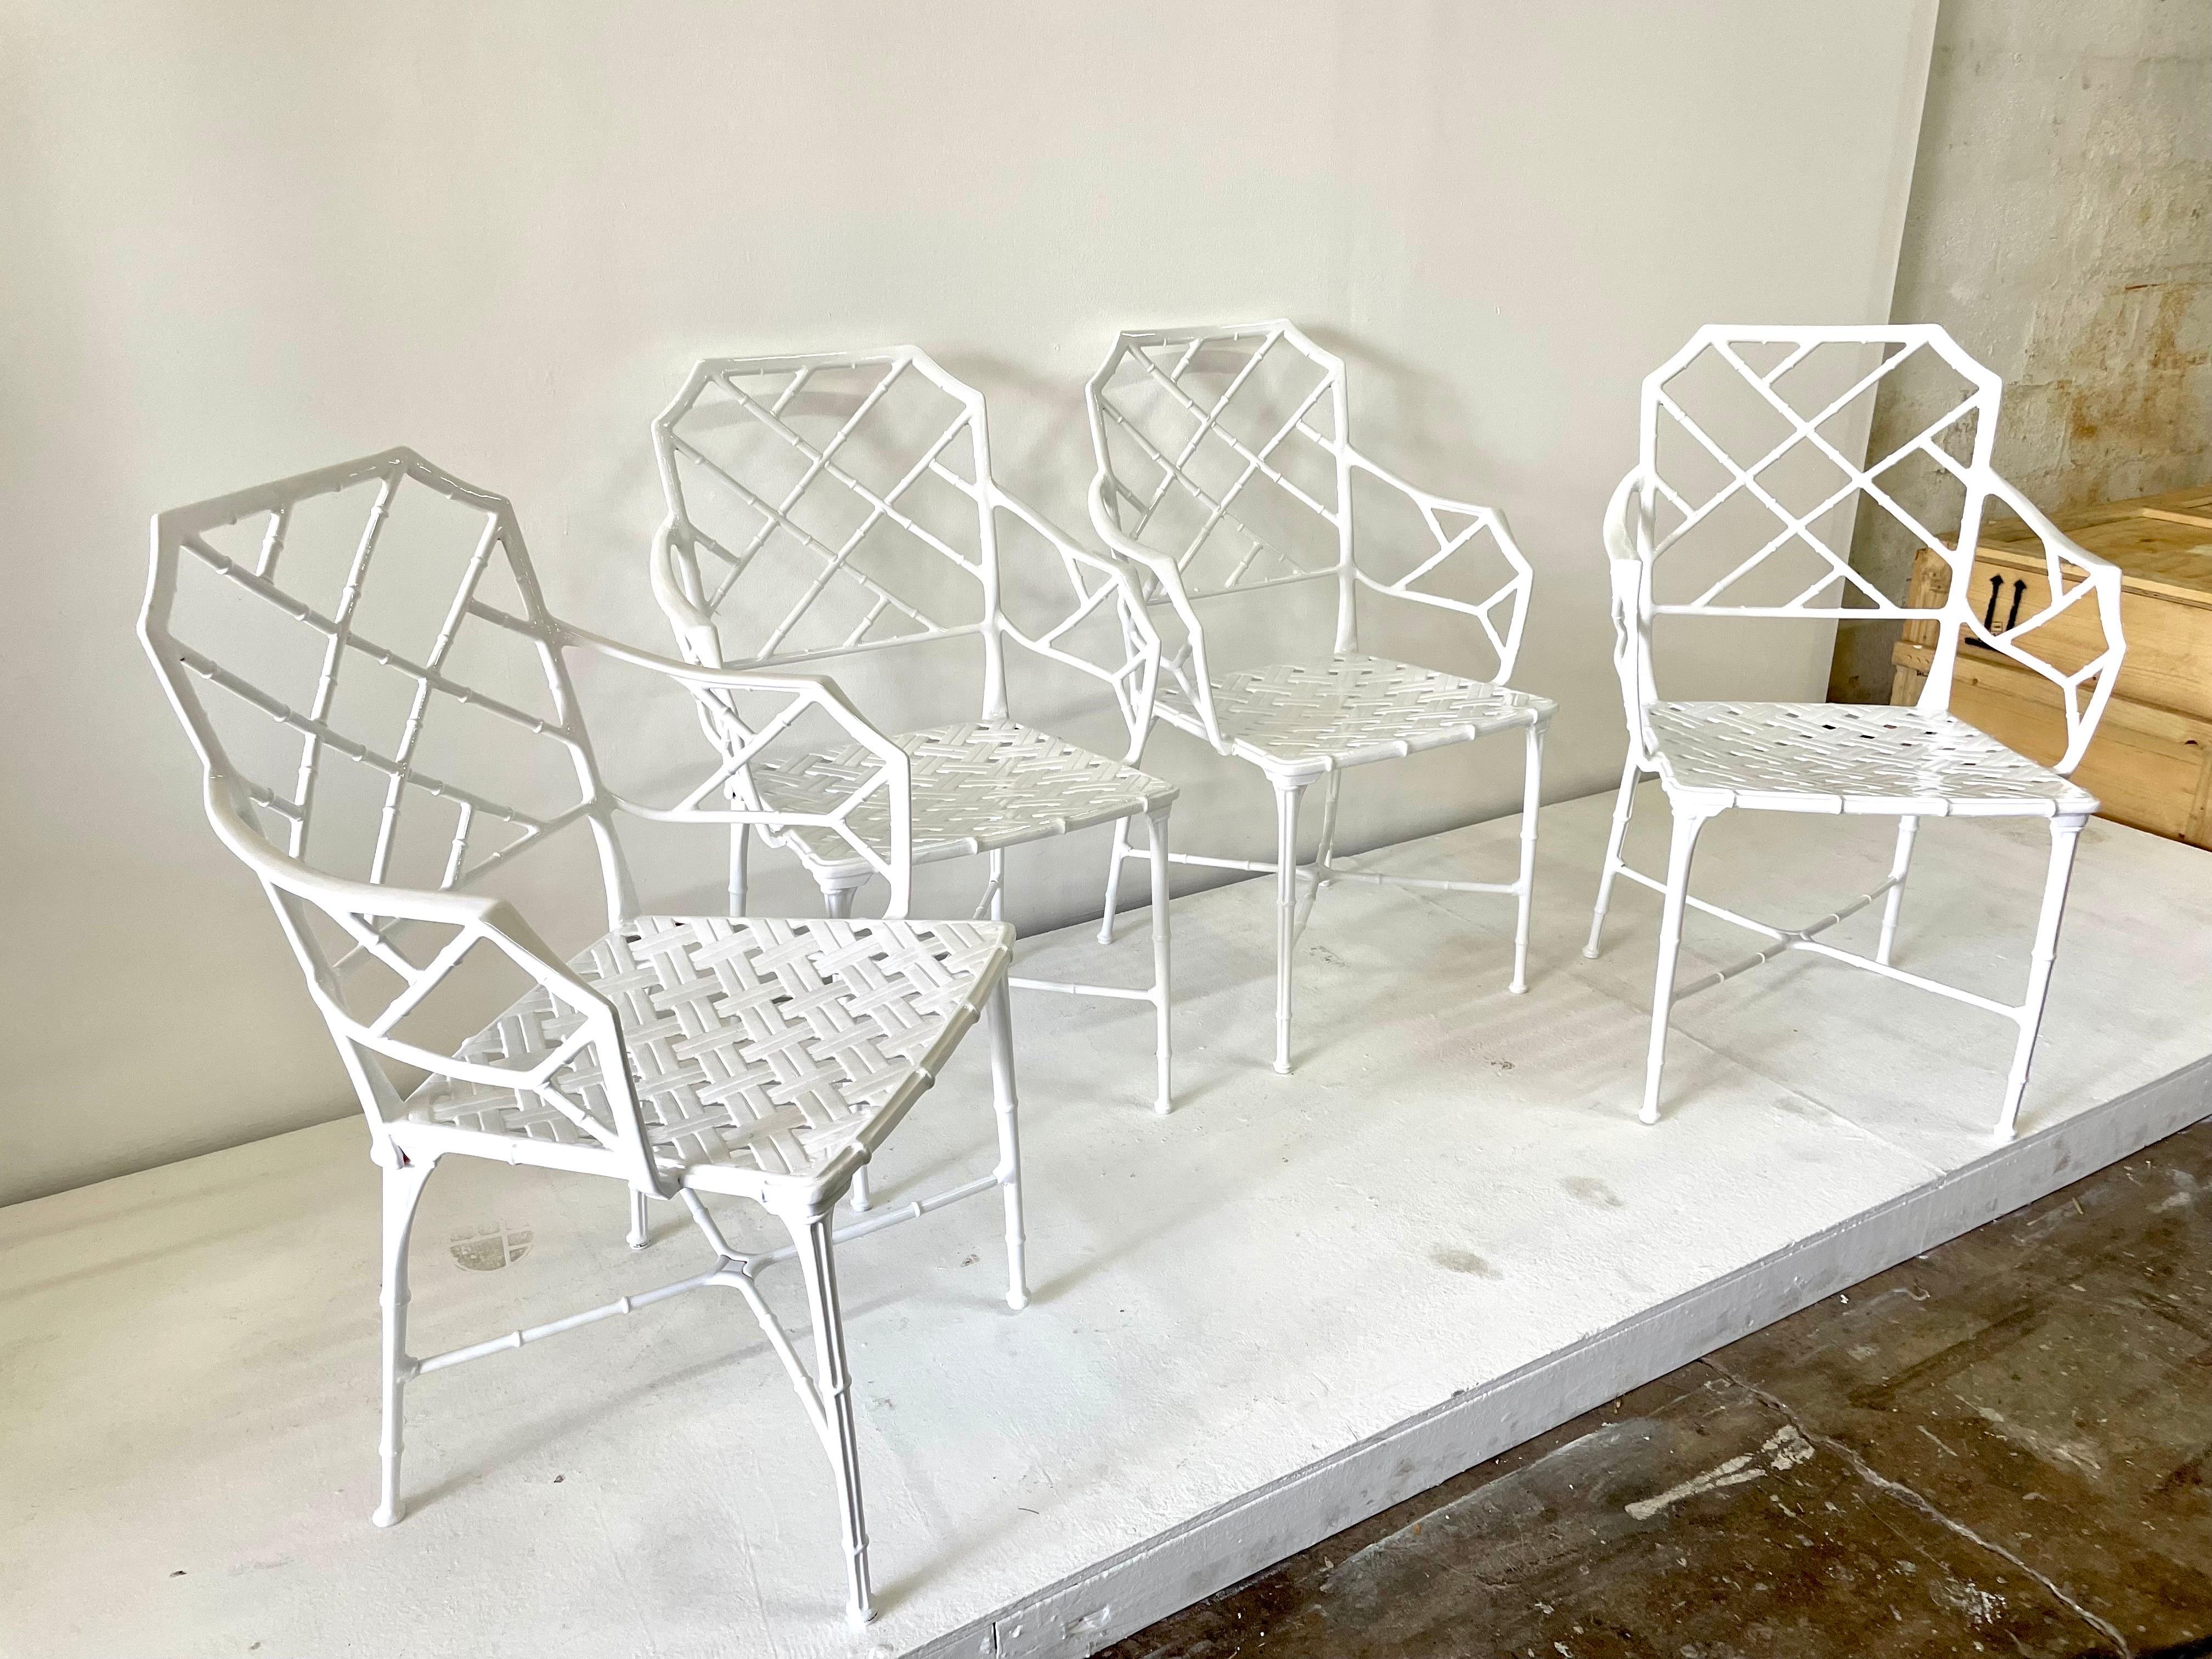 Classic set of 4 Chinese Chippendale faux bamboo dining armchairs for outdoor, garden or patio. Recently powder coated in classic white over cast aluminum. Designed by Hall Bradley for Brown Jordan, 1967.

History & details: Calcutta was designed